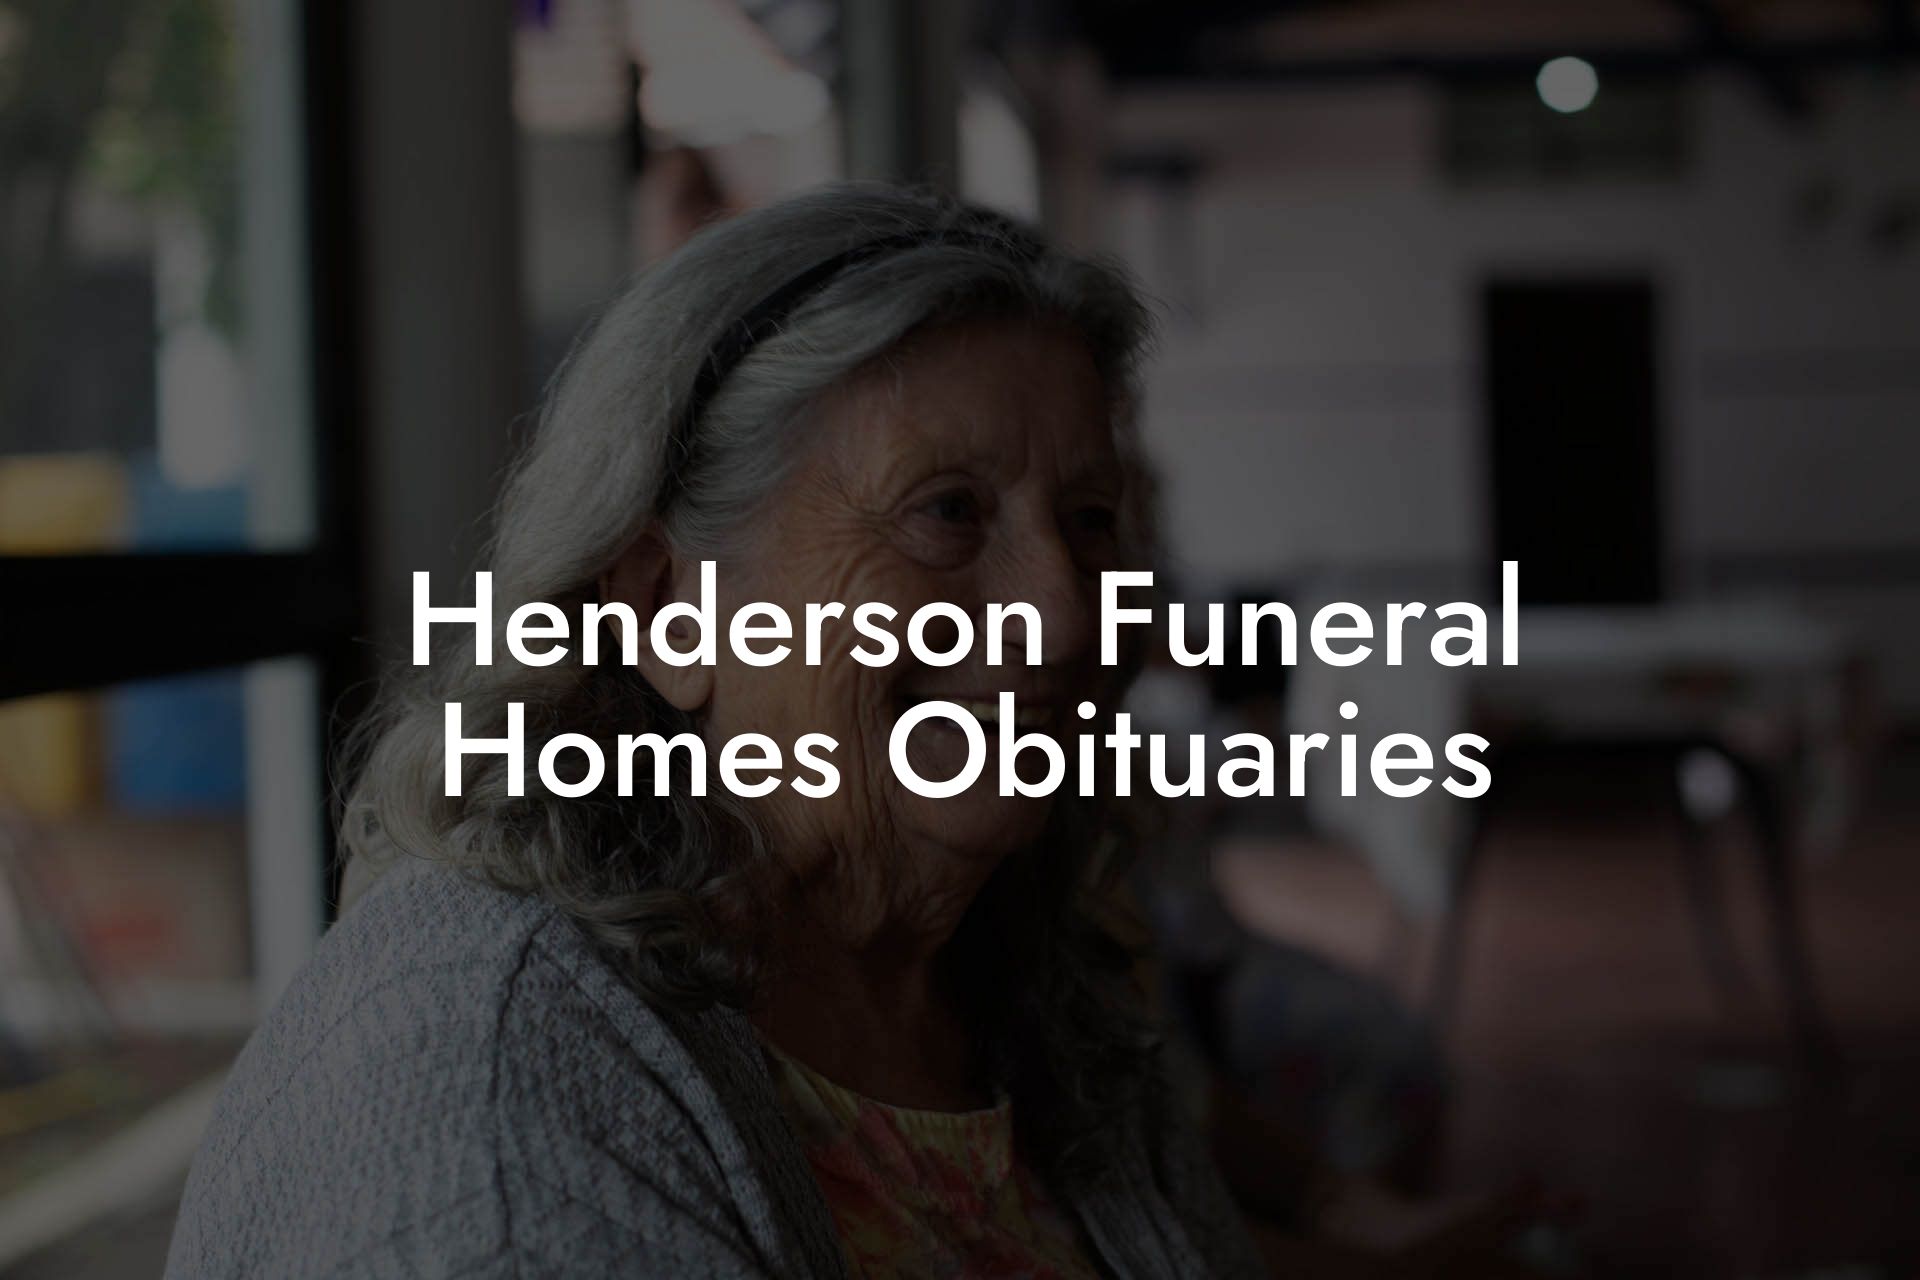 Henderson Funeral Homes Obituaries